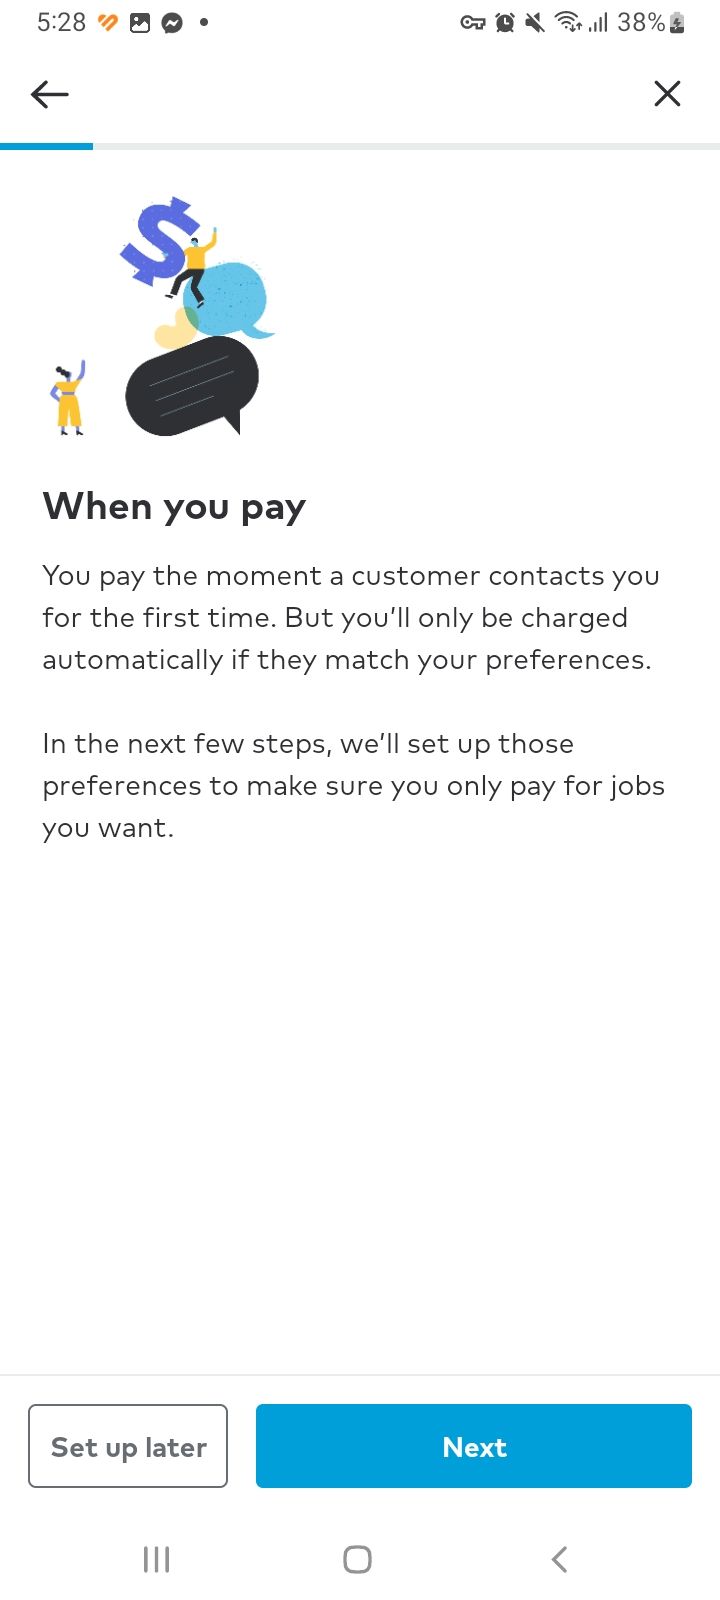 Thumbtack for Professionals app payment terms